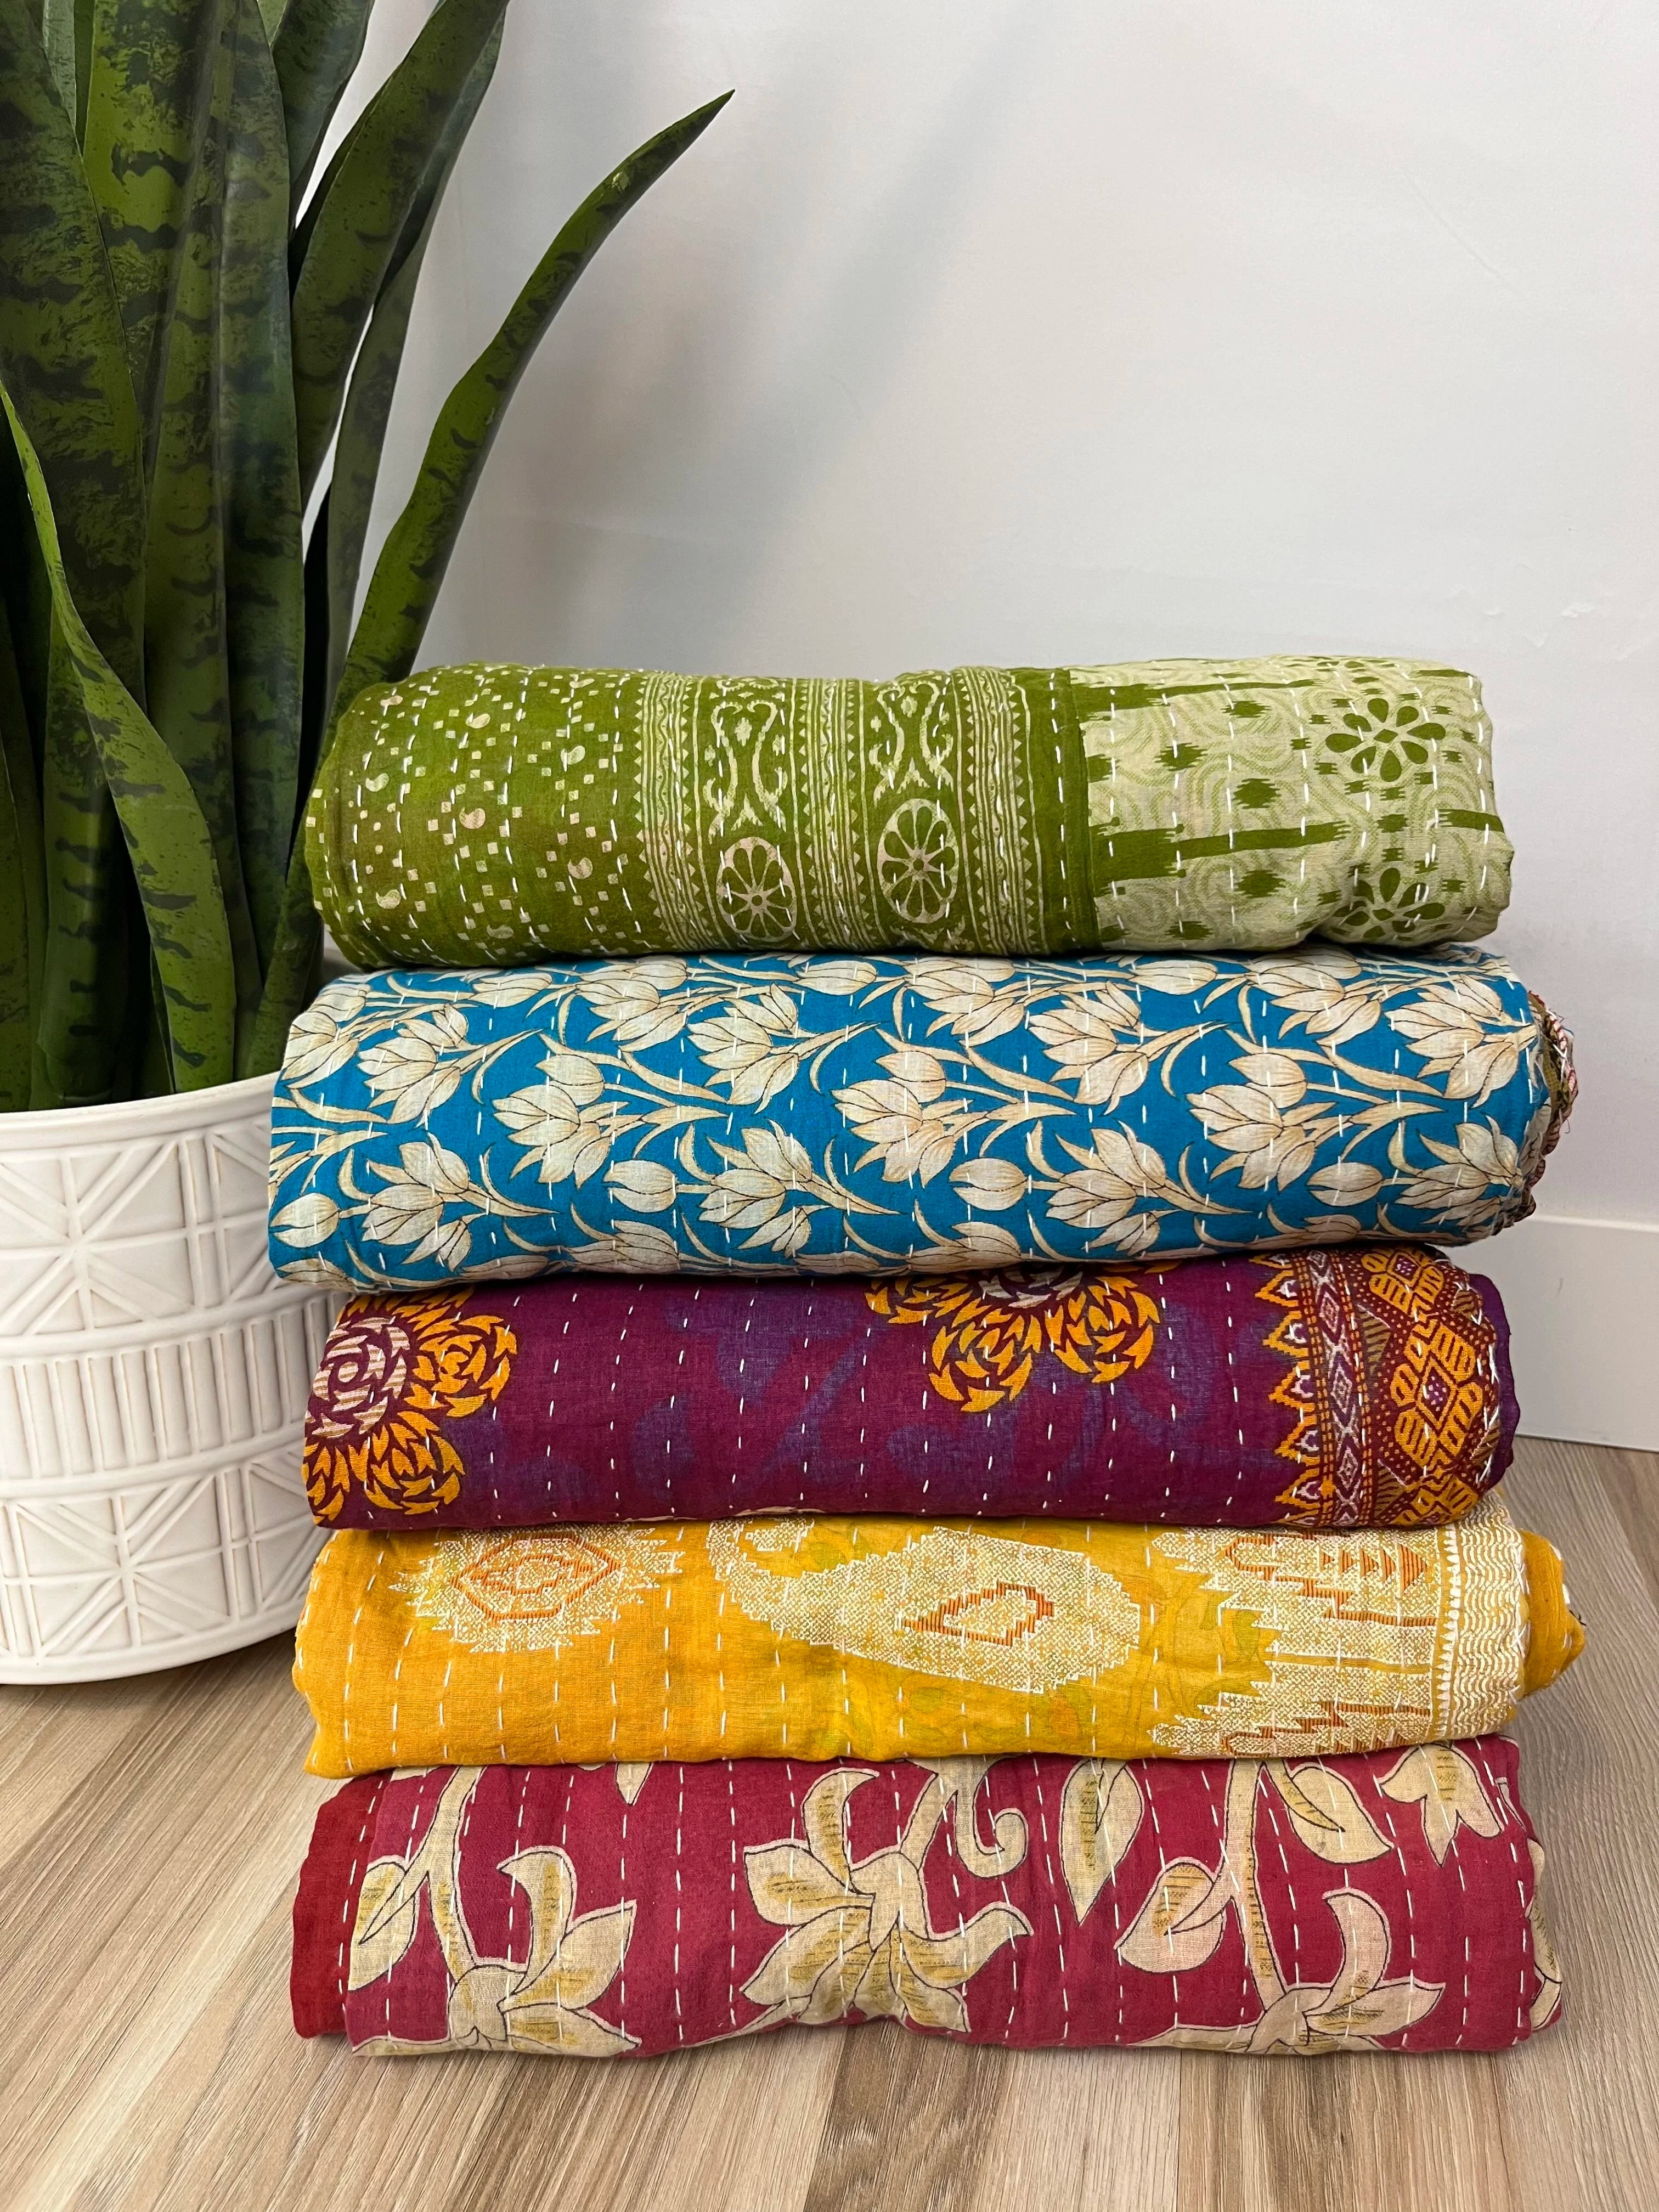 All Kantha Quilt Collections - From $28